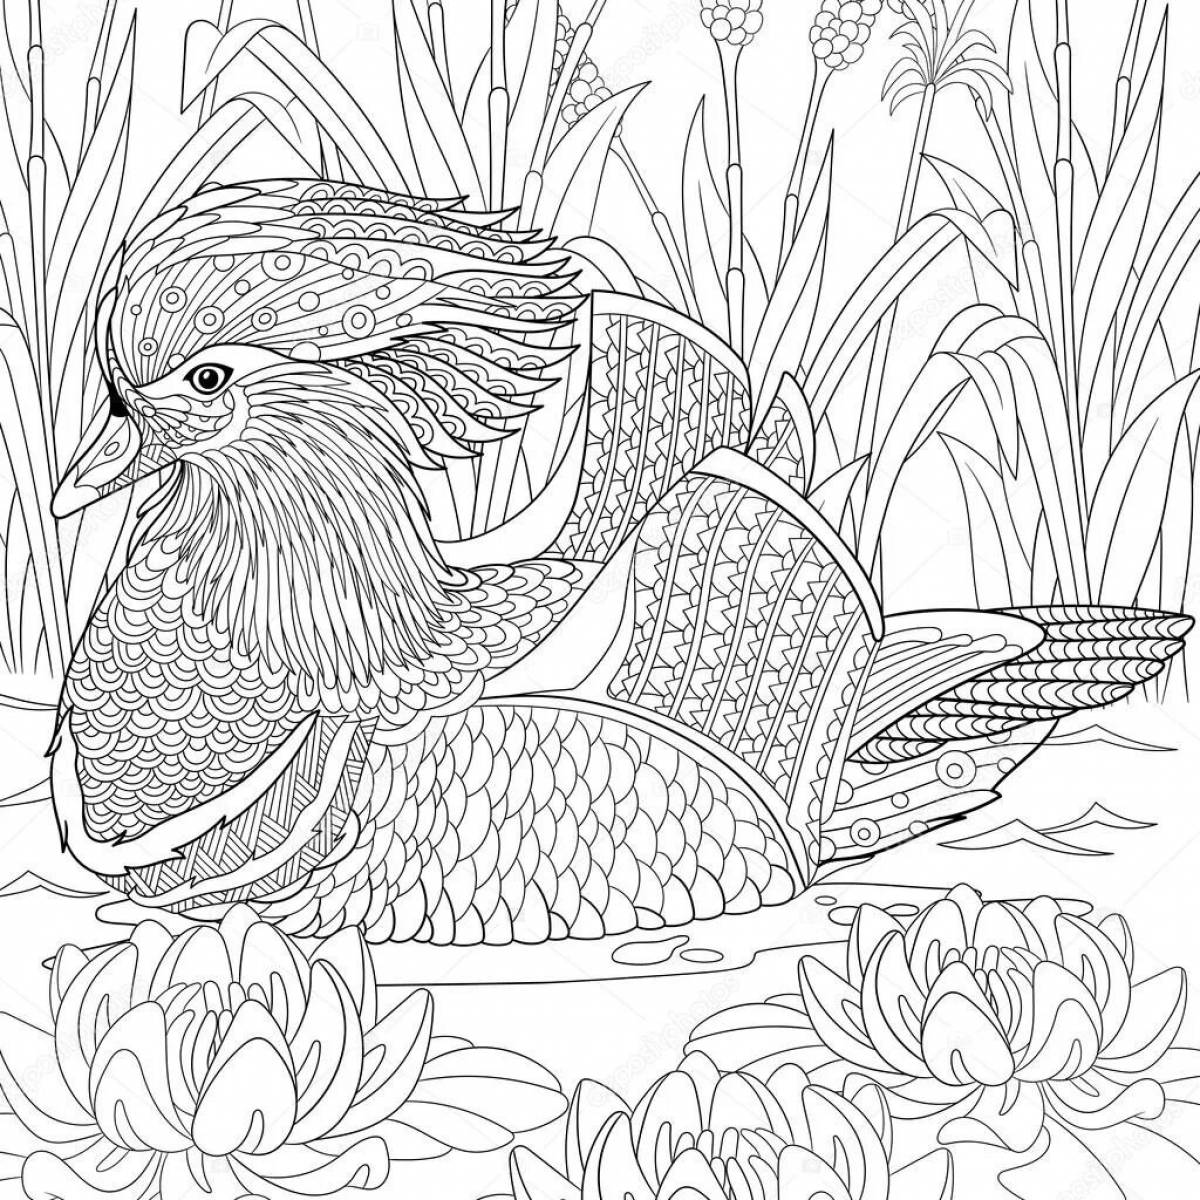 Attractive tangerine coloring book for kids